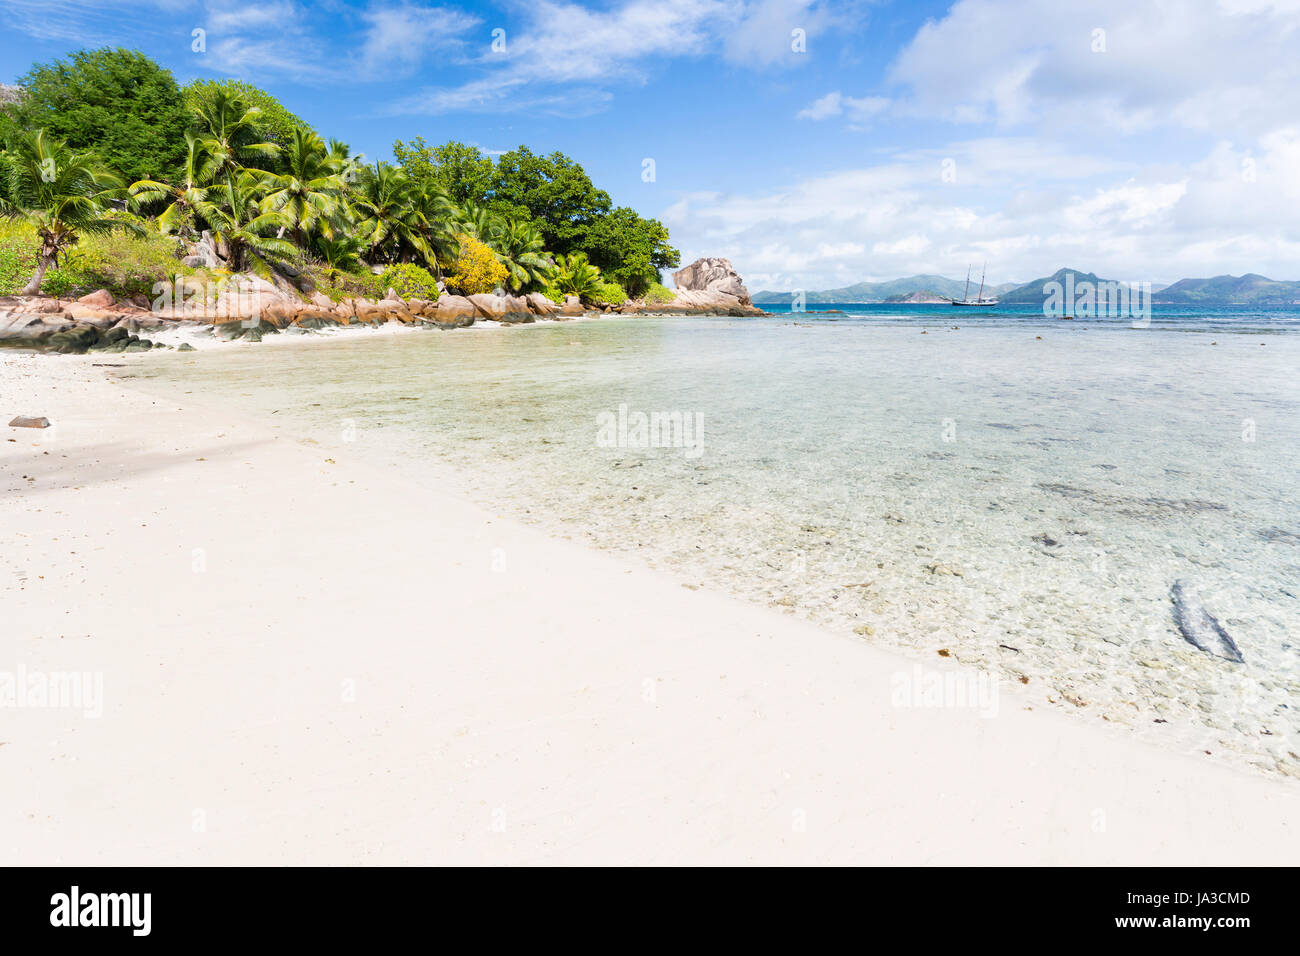 Calm water at Anse Severe in La Digue, Seychelles with palm trees and granite rocks in the background Stock Photo